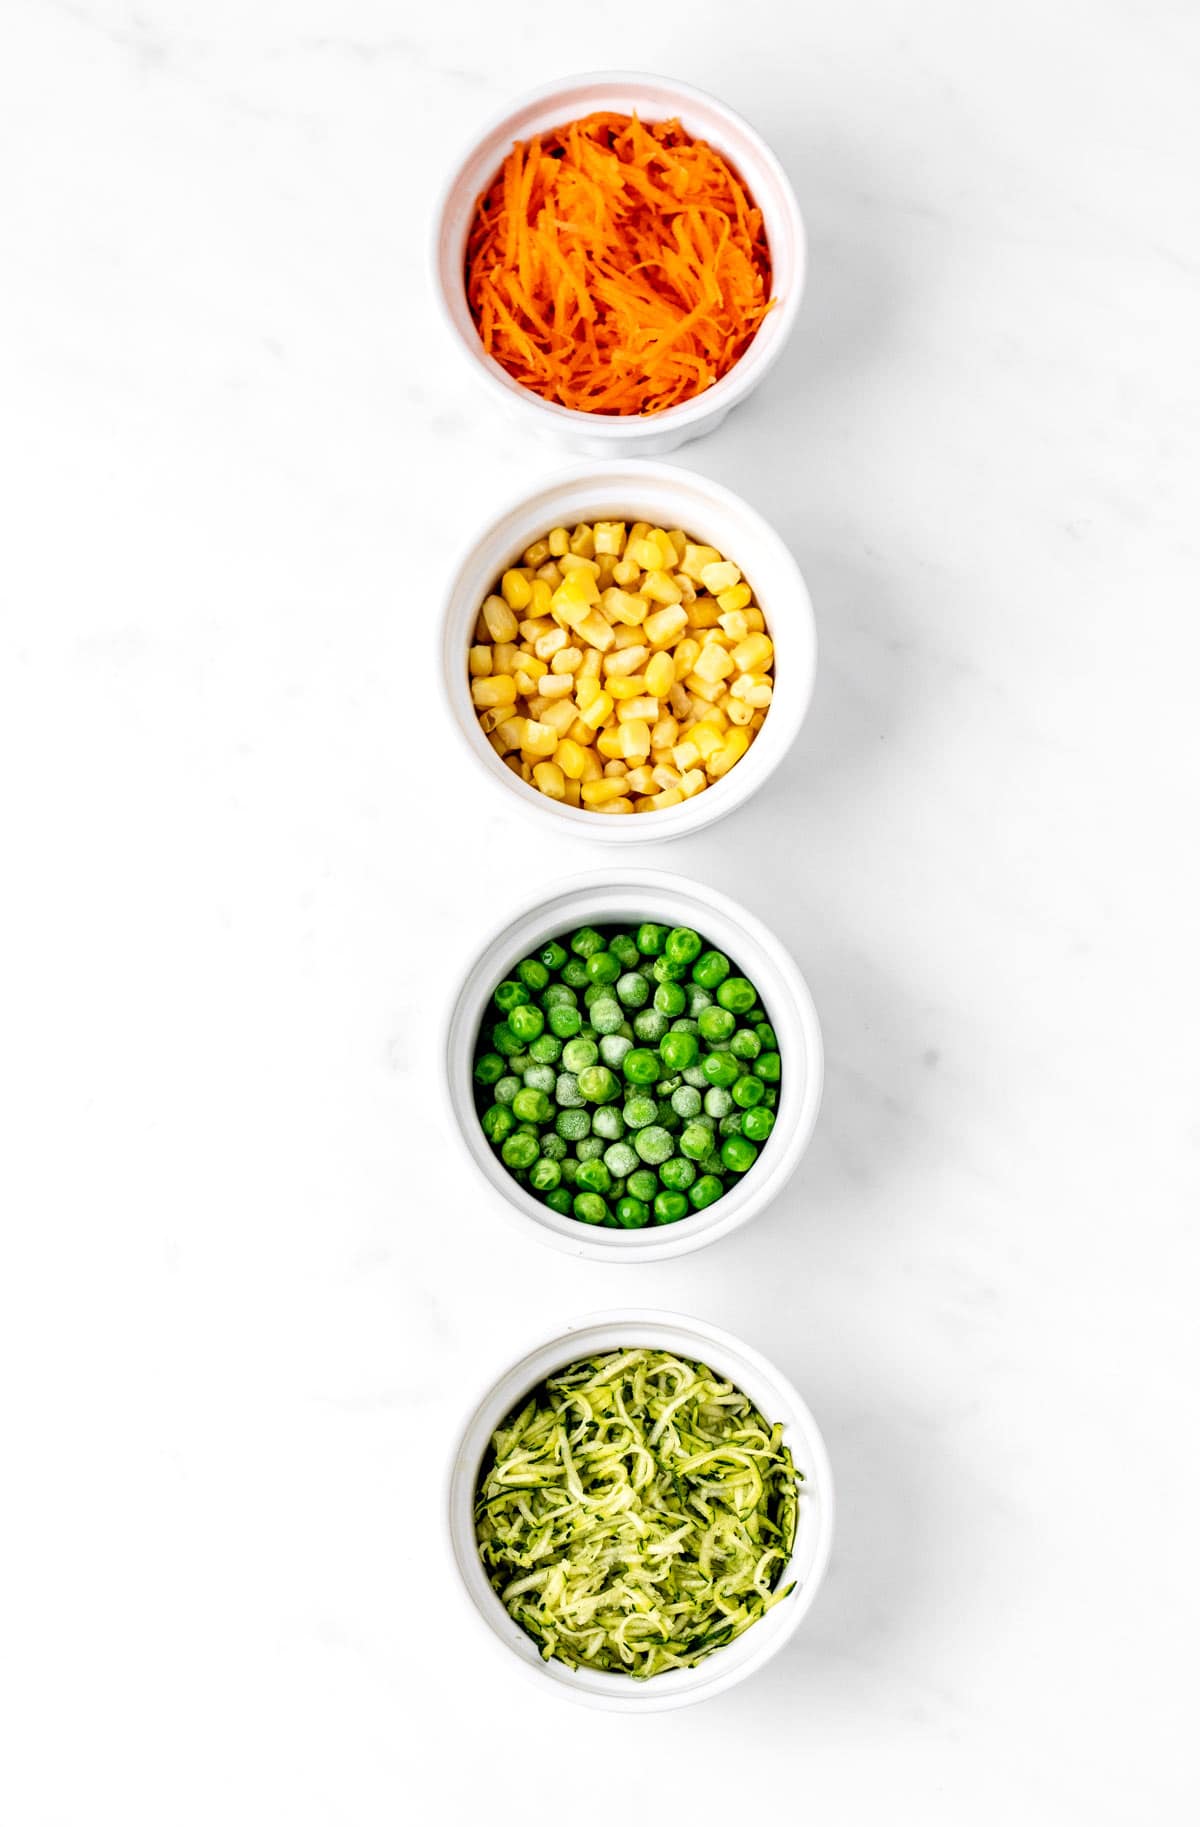 Carrots, corn, peas and zucchini in four small bowls.